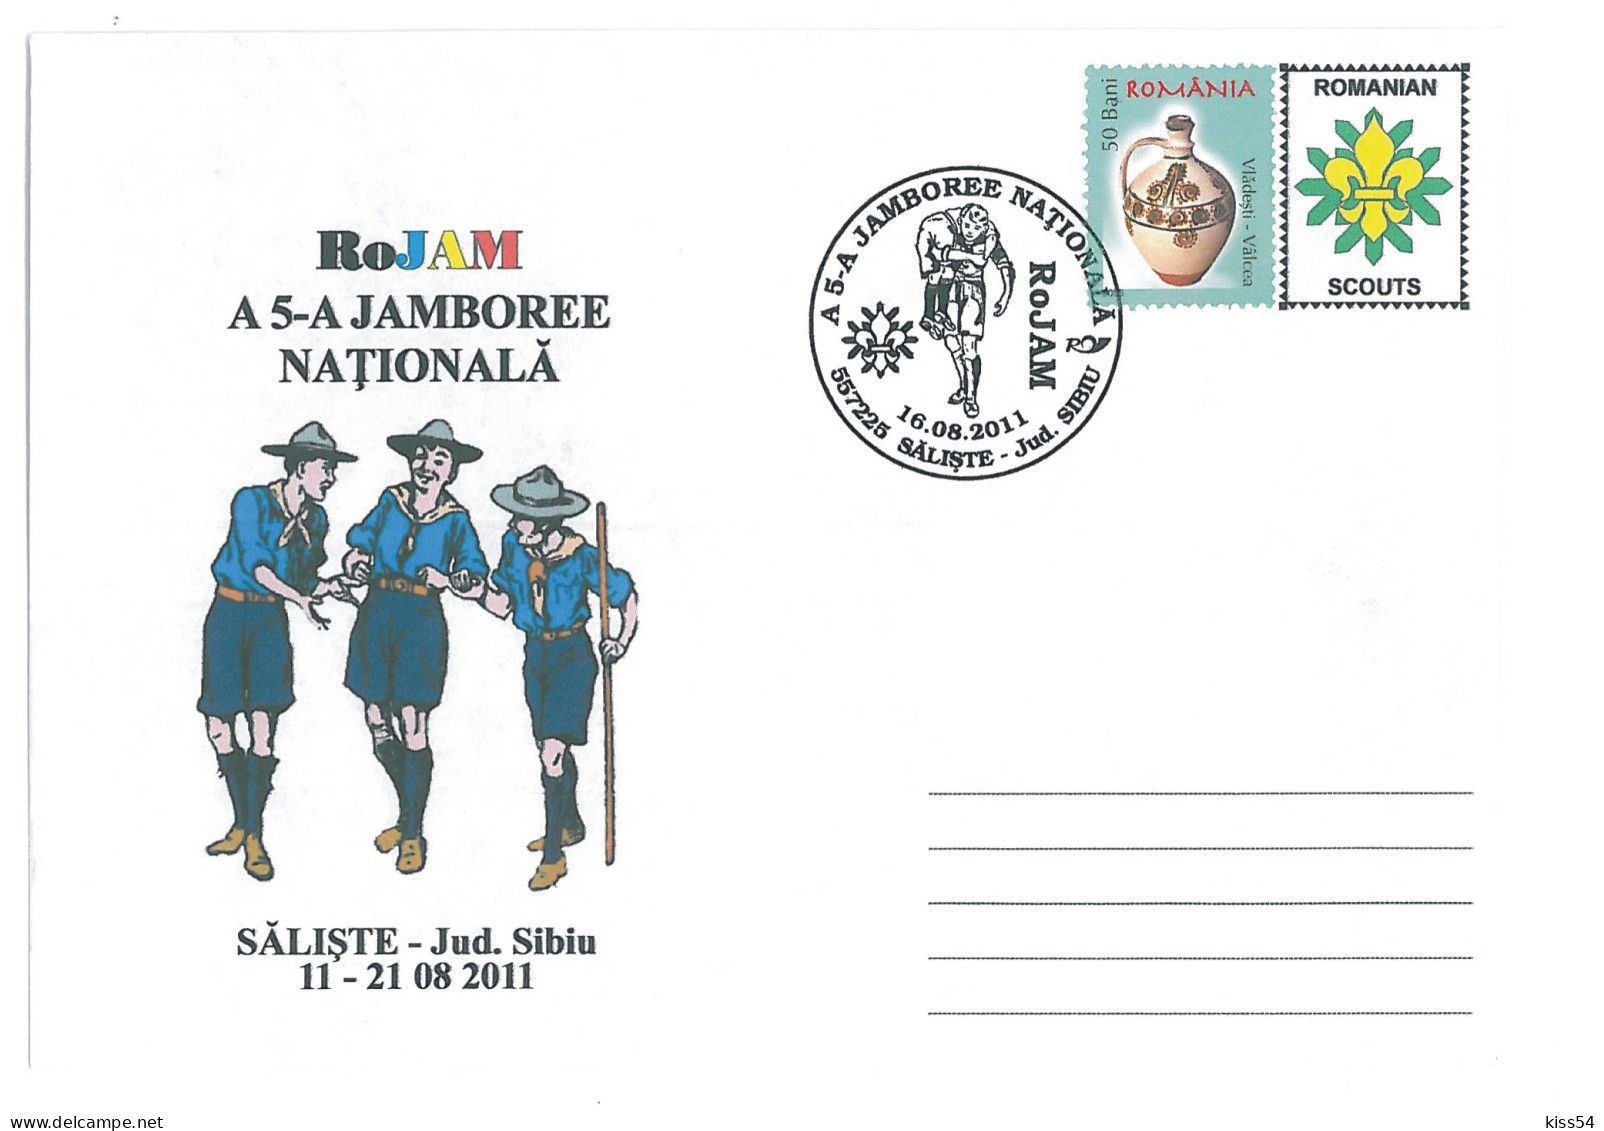 SC 47 - 1303 ROMANIA, National JAMBOREE, Scout - Cover - Used - 2011 - Covers & Documents